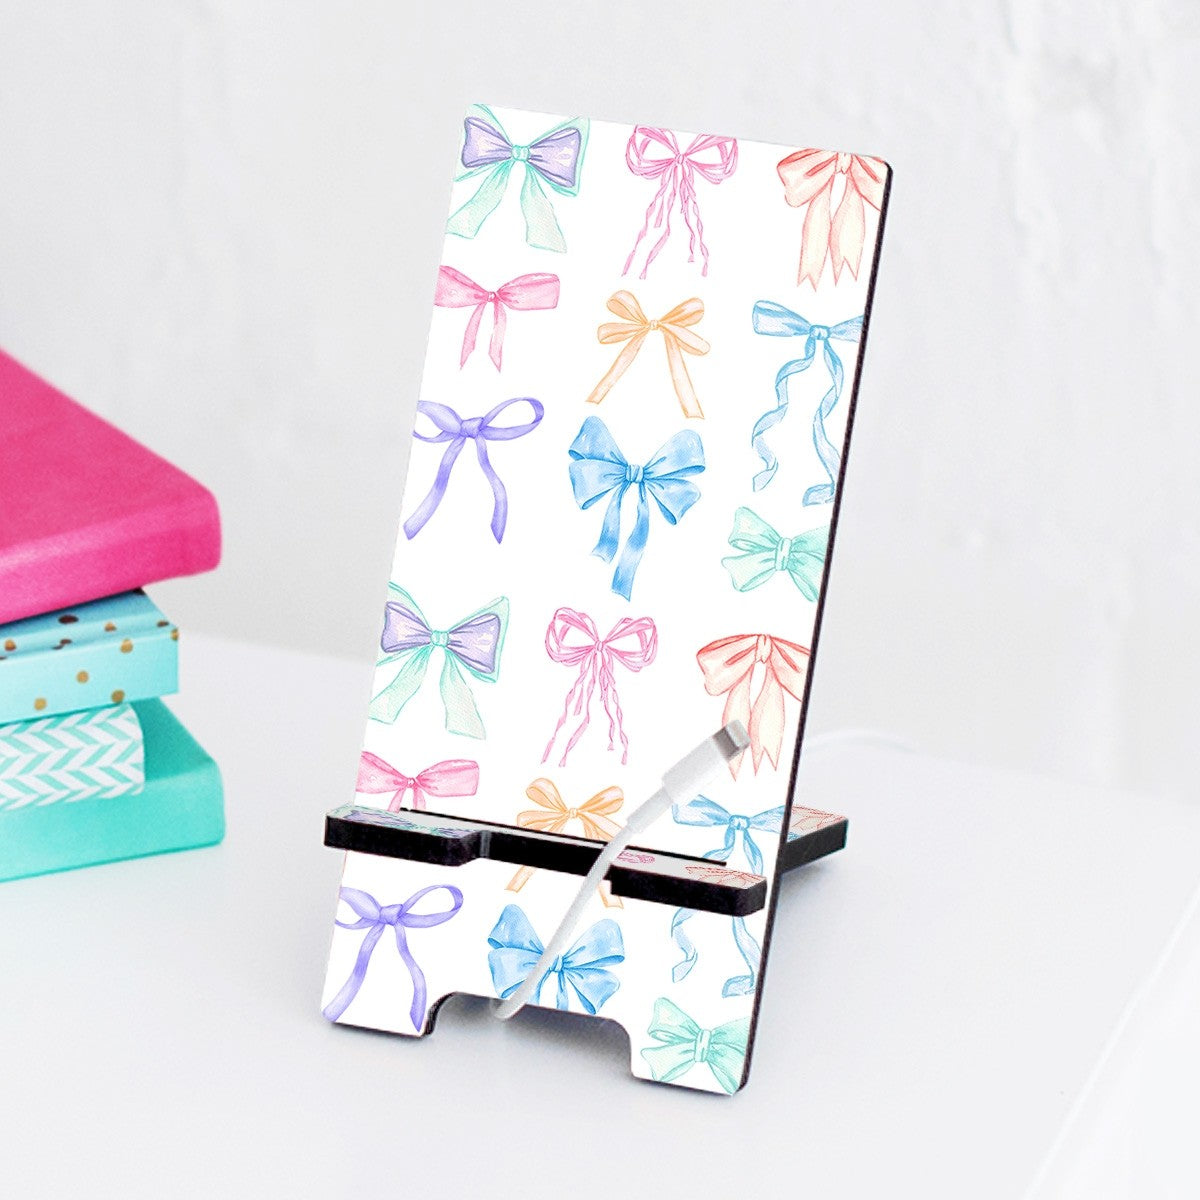 Darling Bow Phone Stand (Ships in 1-2 Weeks)